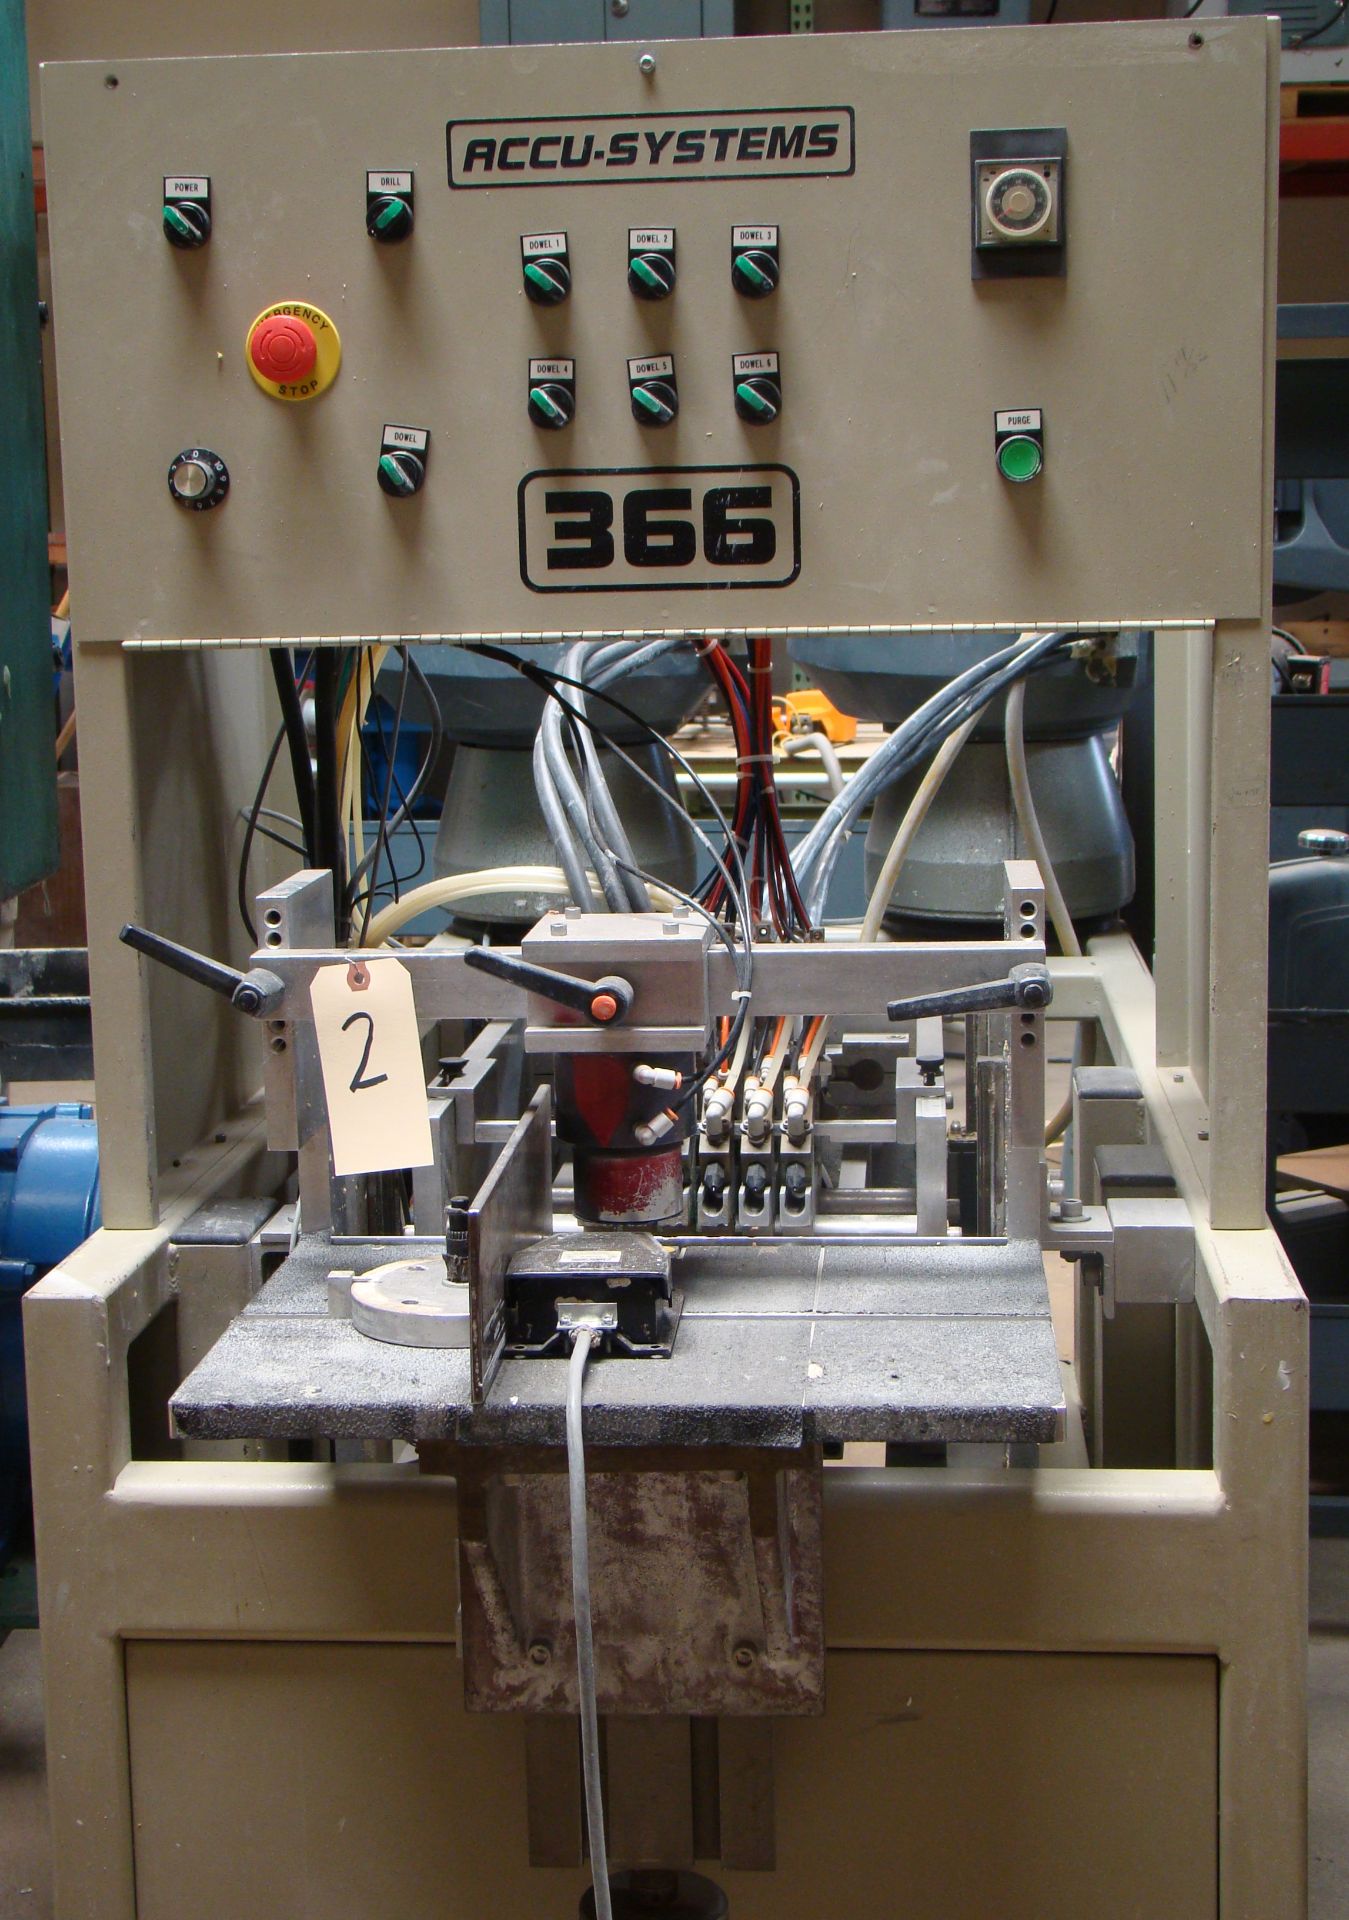 ACCU-Systems 366 Dowel Insertion Machine with Foot Pedal, Vibratory Bowl Feeders, Glue Pot 220 - Image 6 of 8